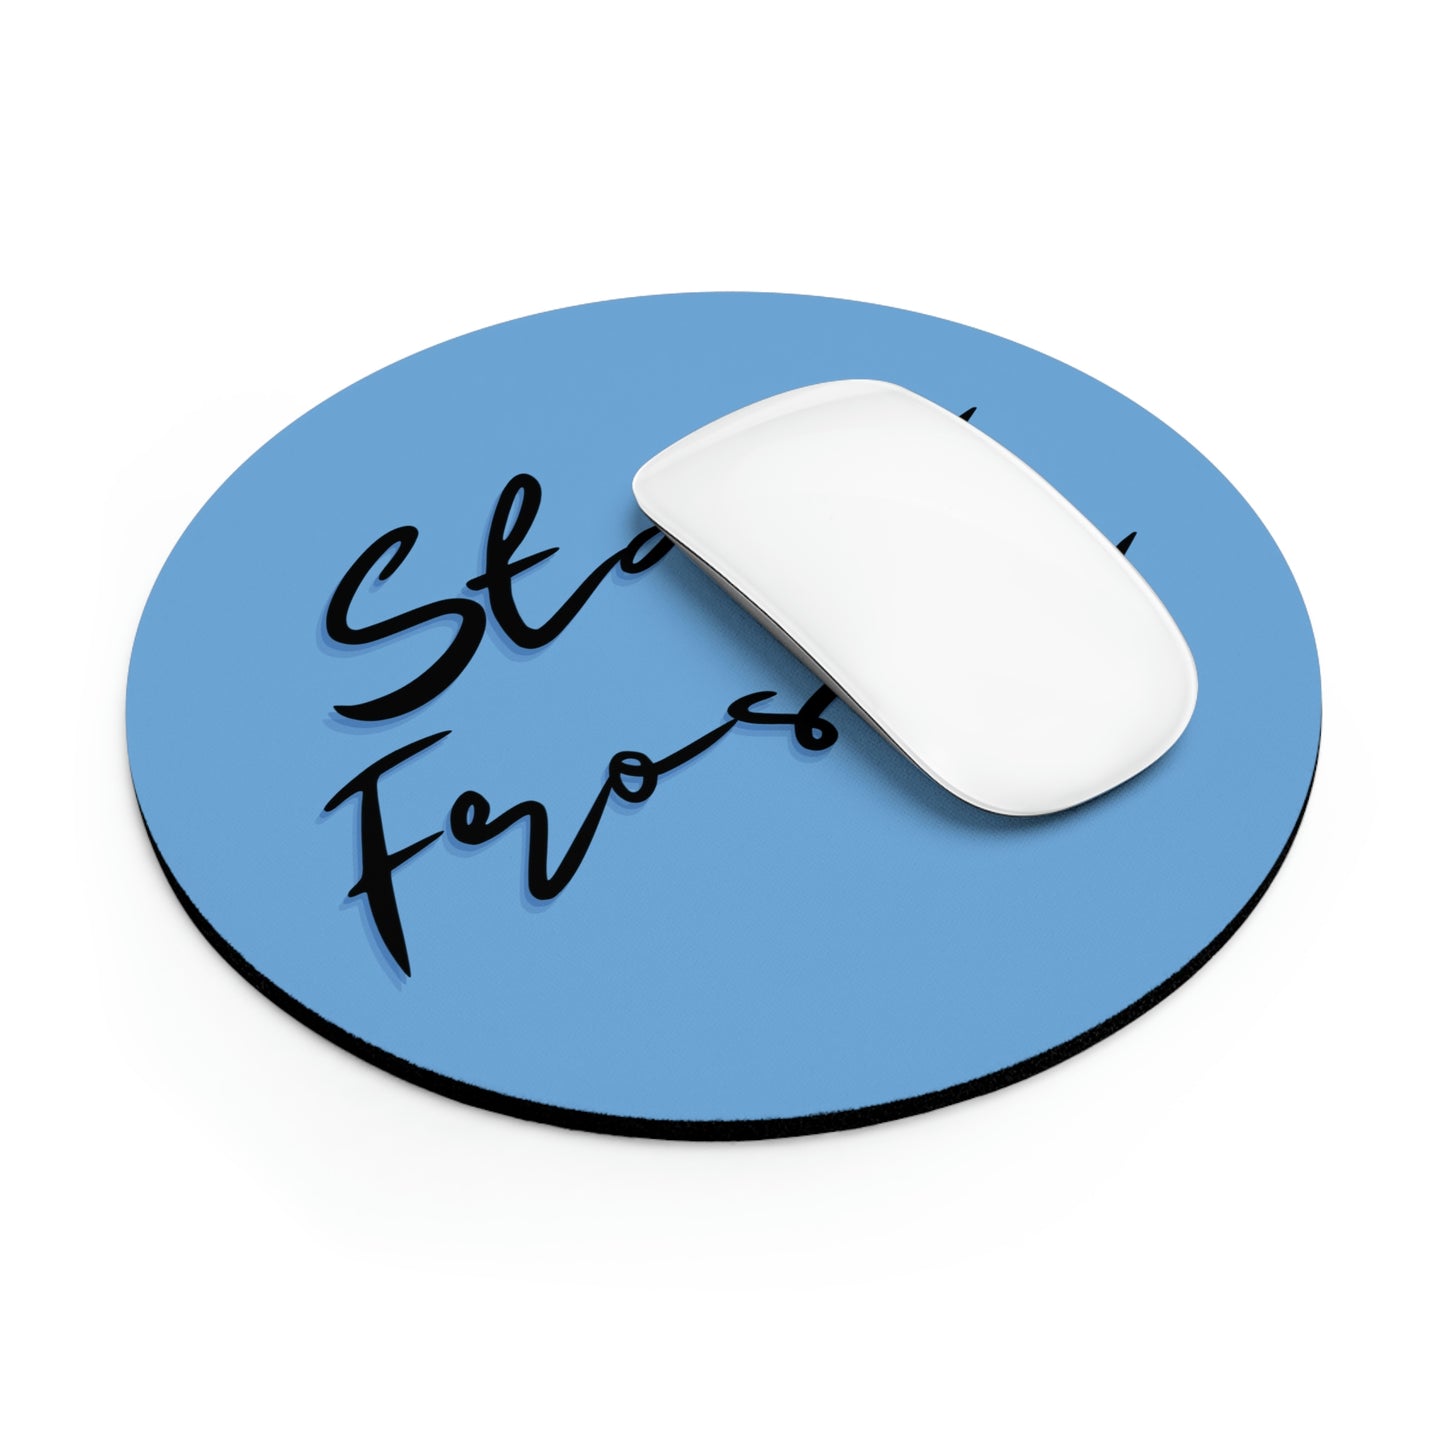 A Stay Frosty Blue Mouse Pad with the words 'stay frosty' on it.